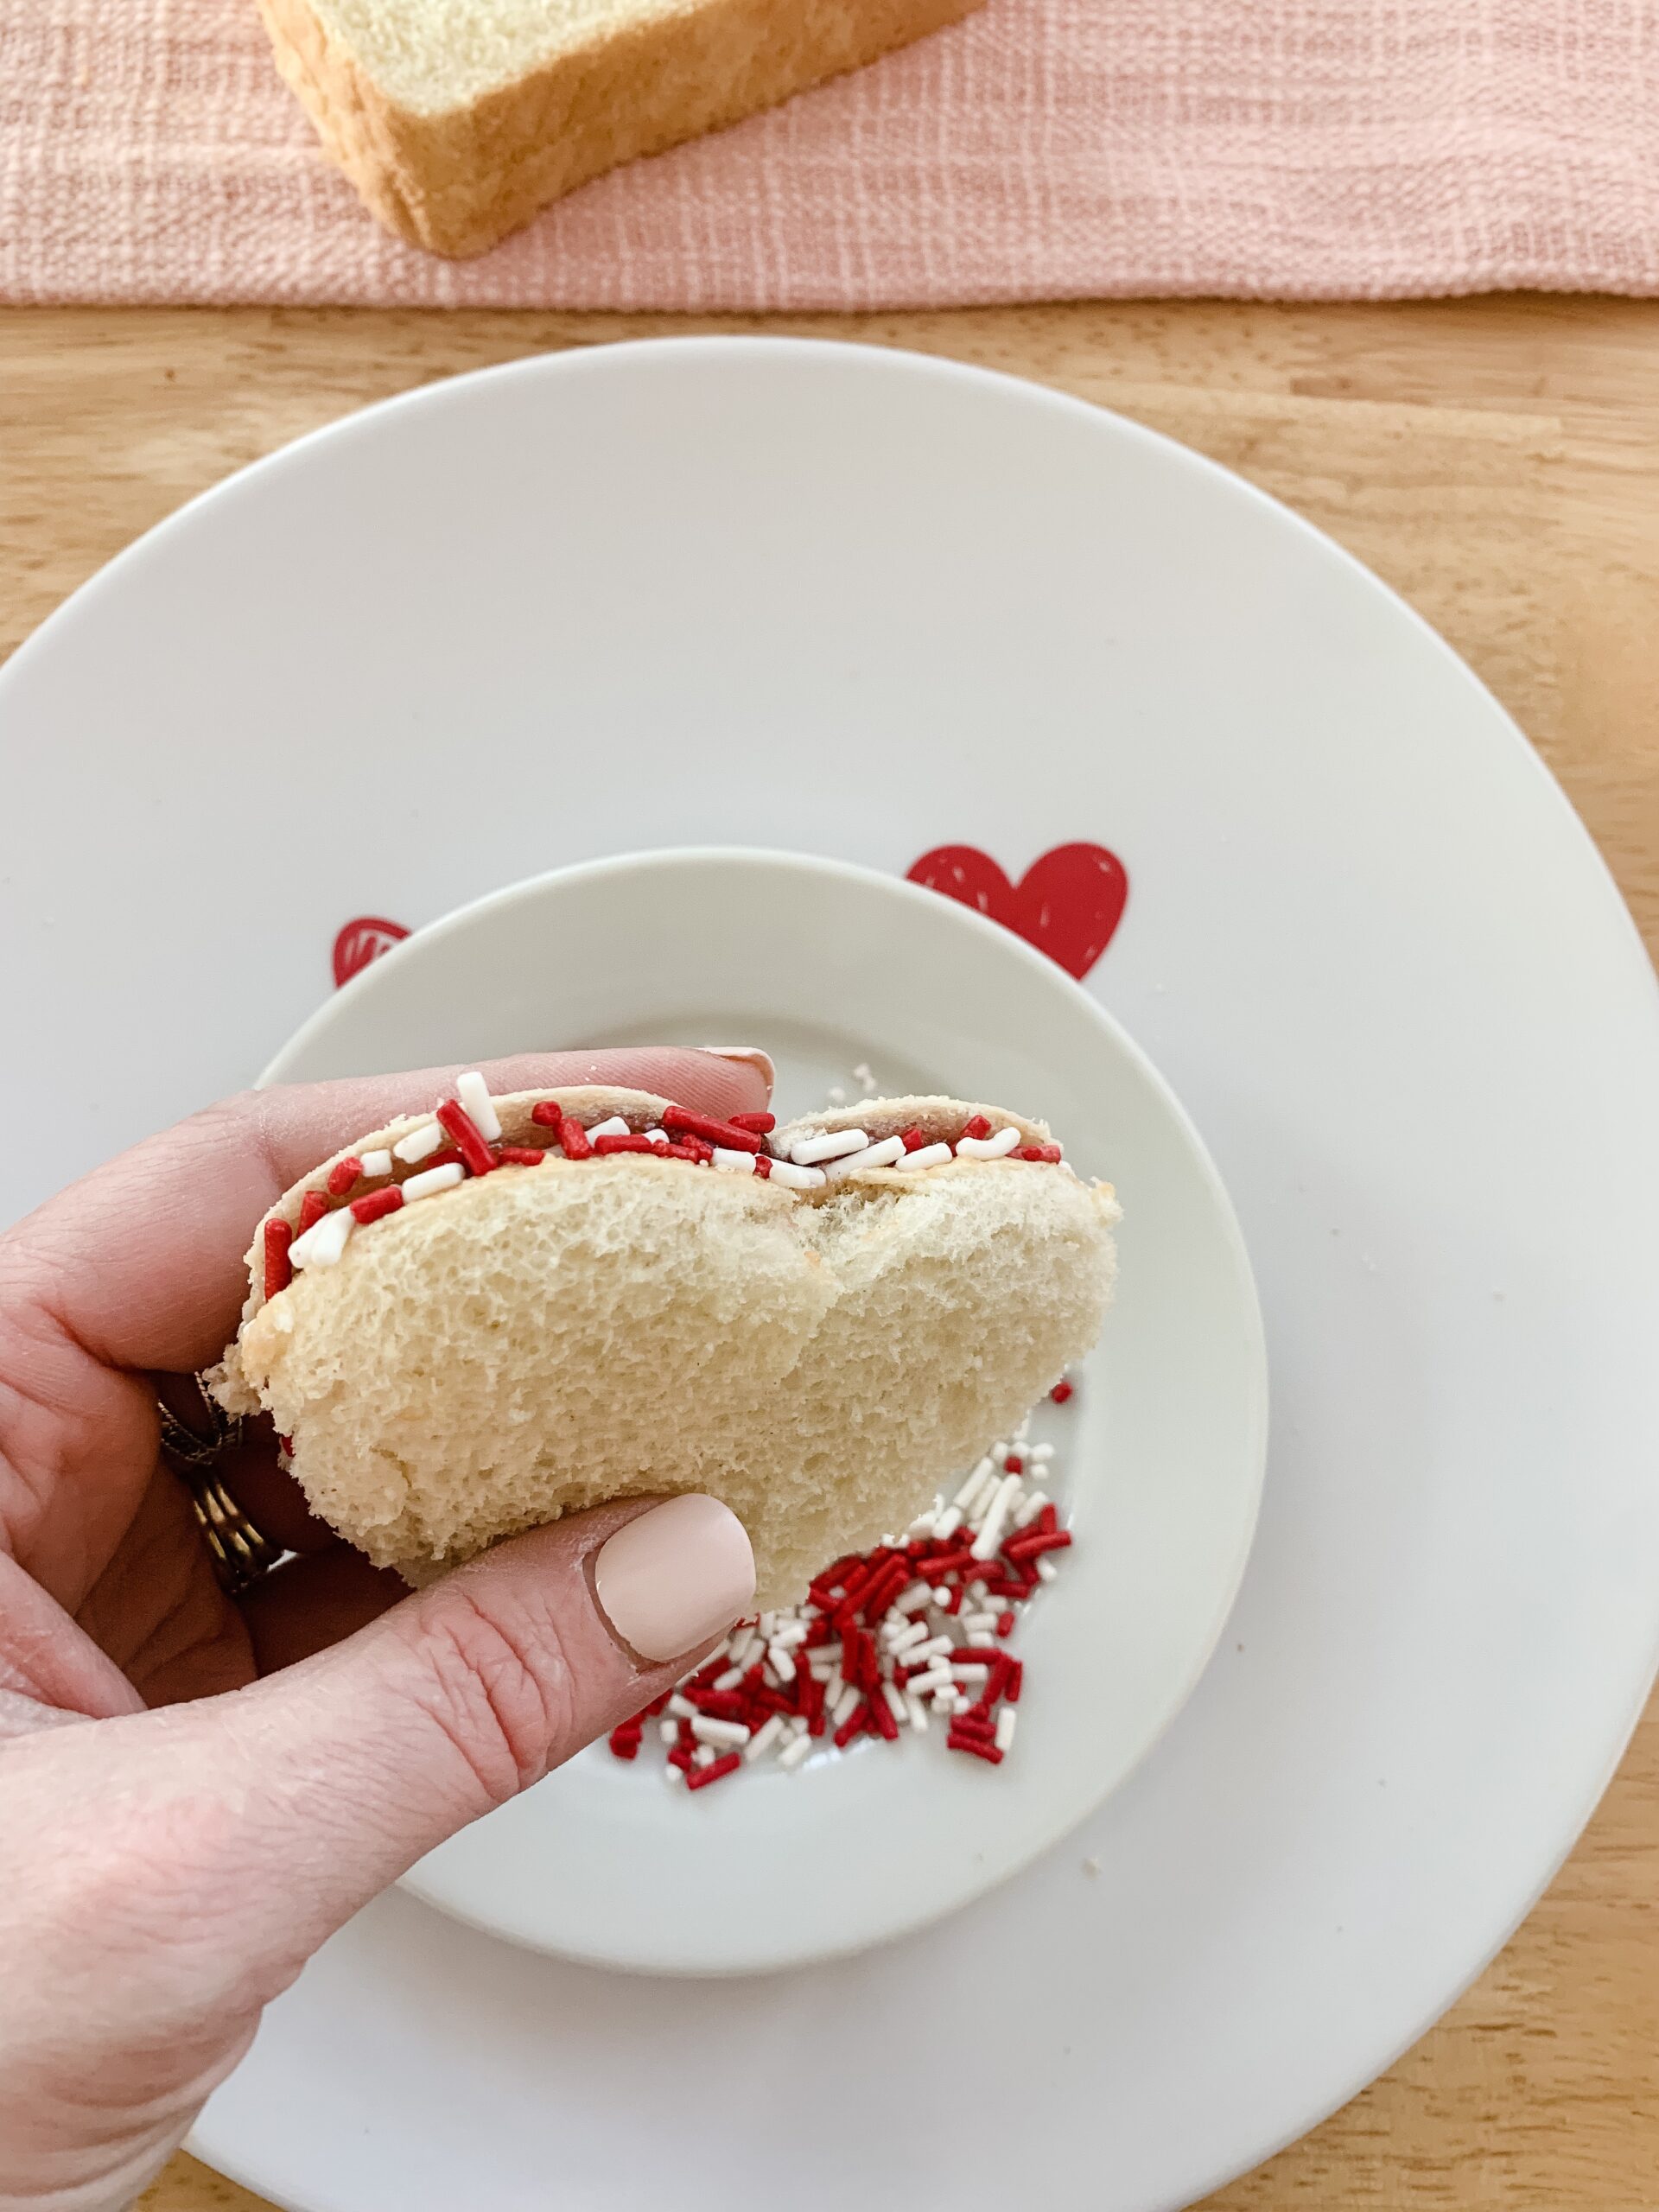 sprinkle covered Valentine's peanut butter and jelly sandwich